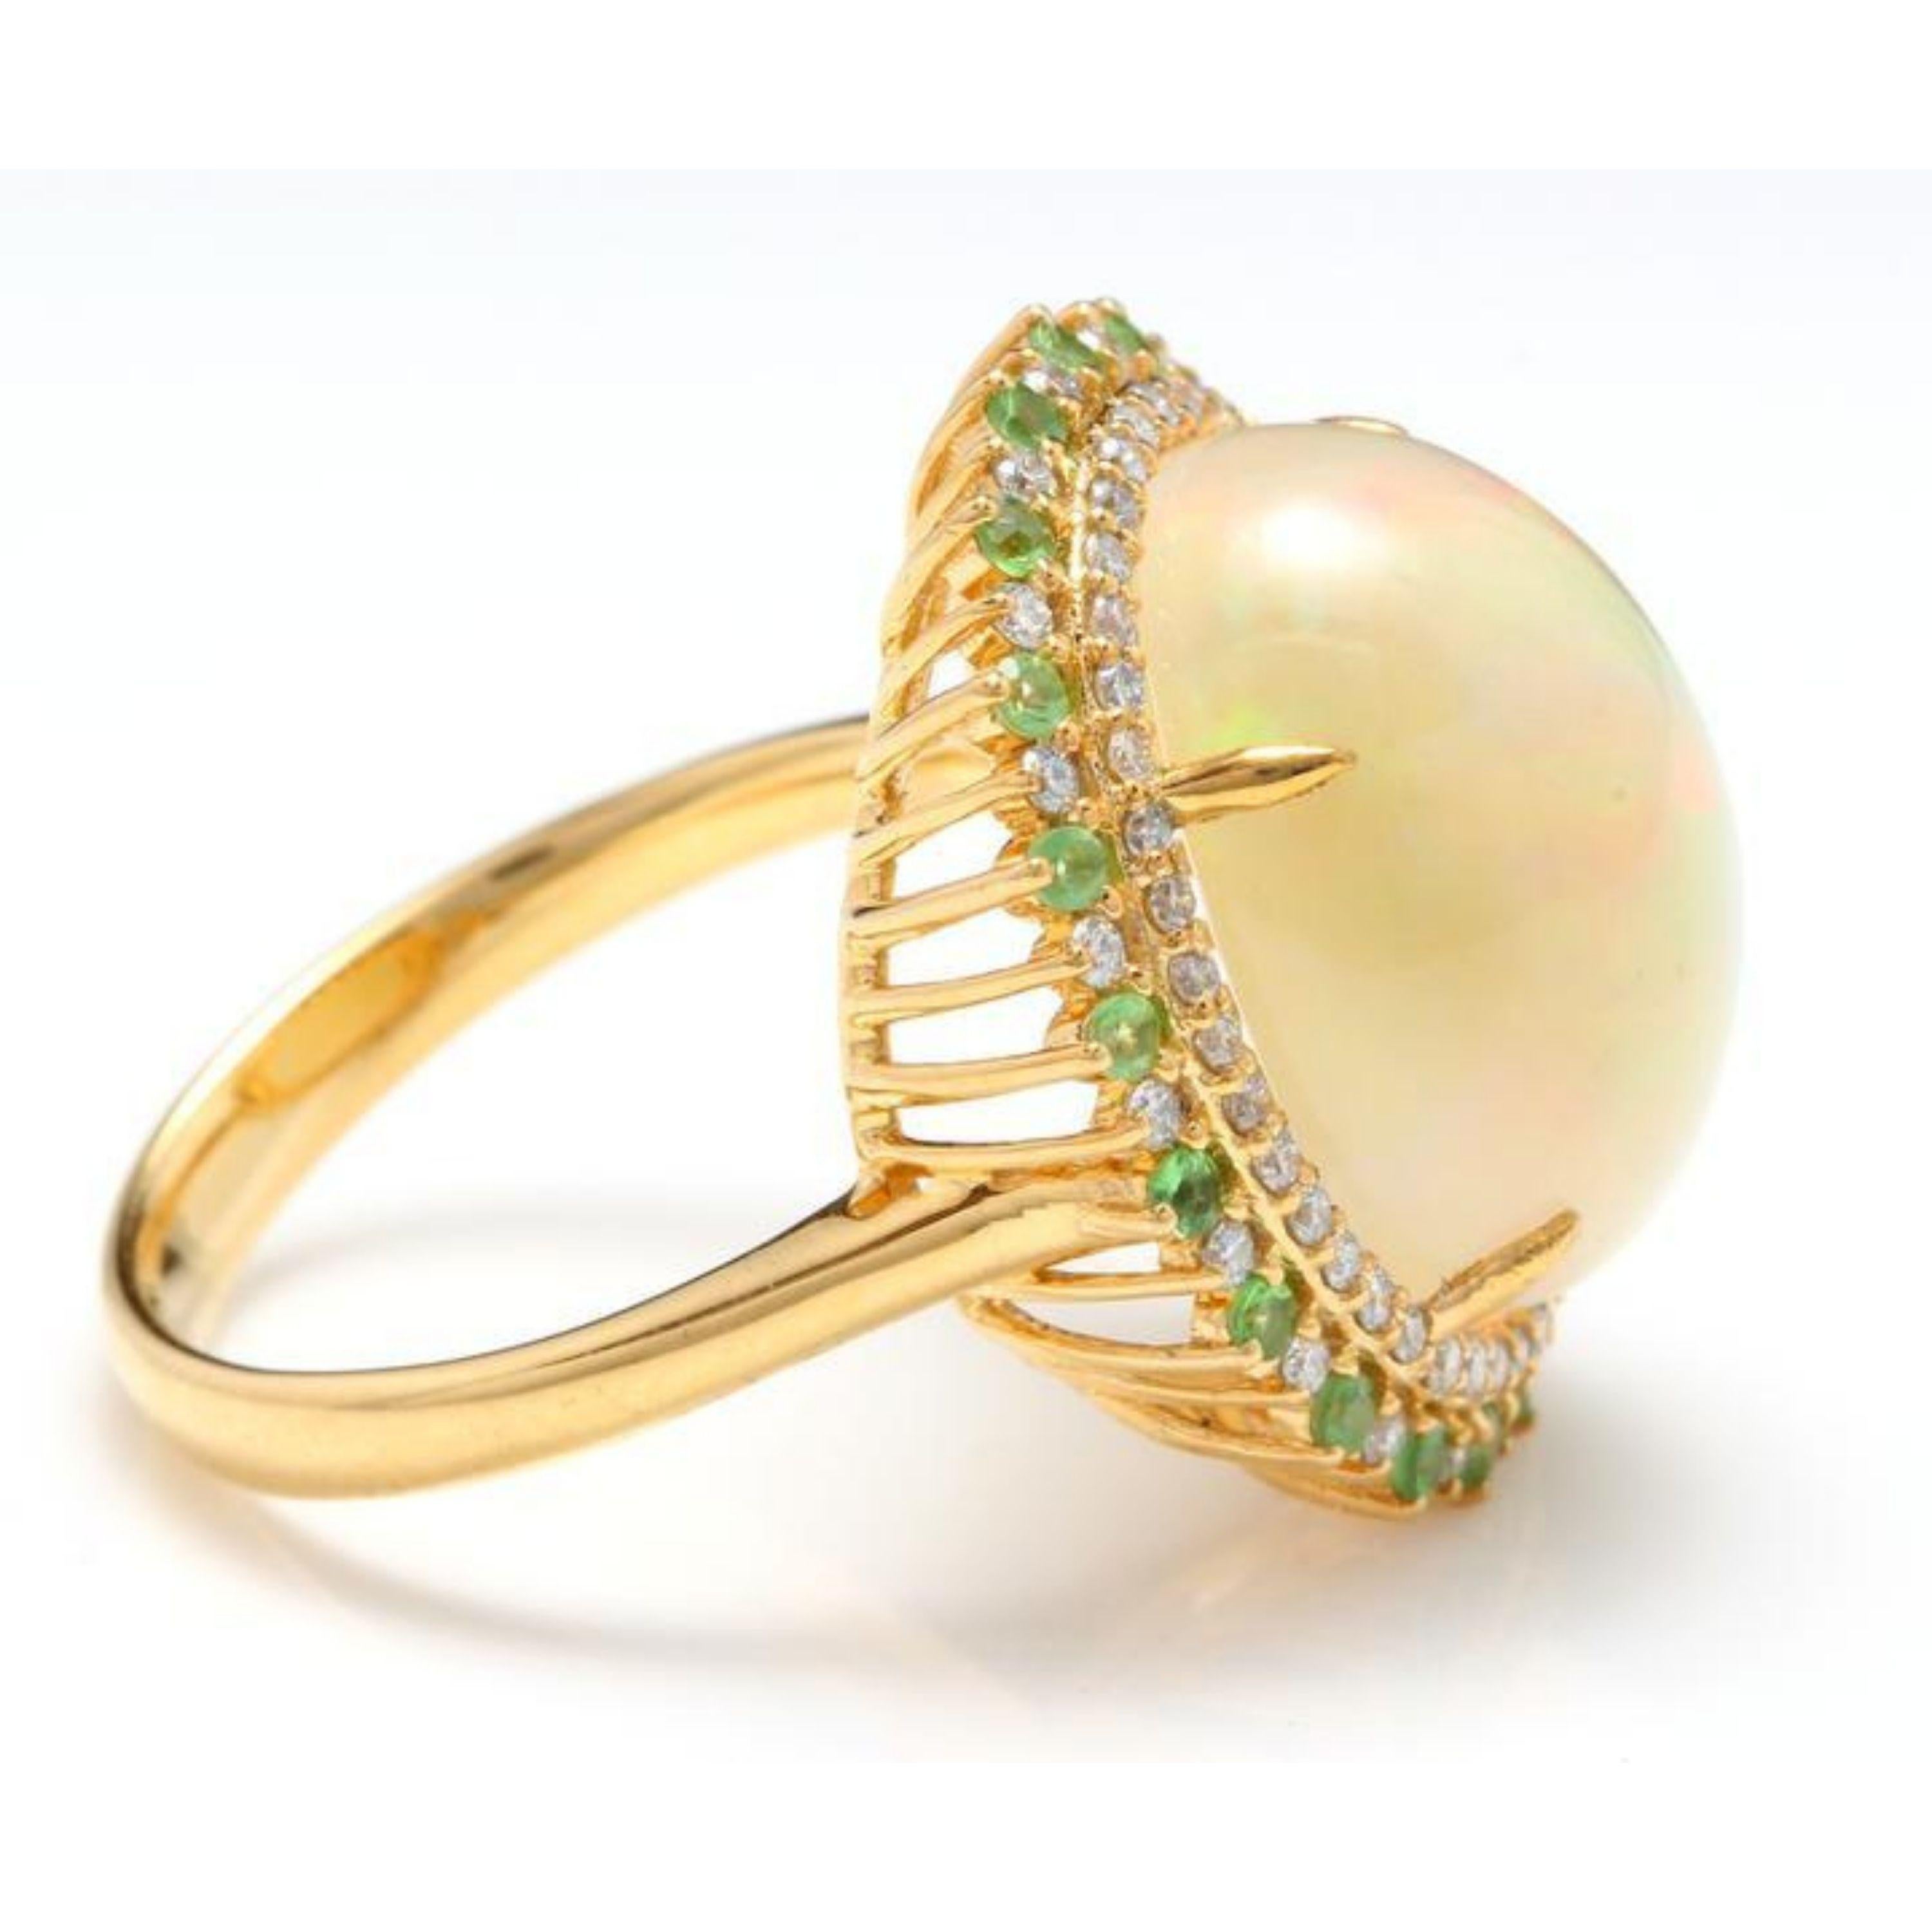 Mixed Cut 8.55 Ct Natural Ethiopian Opal, Tsavorite and Diamond 14K Solid Yellow Gold Ring For Sale